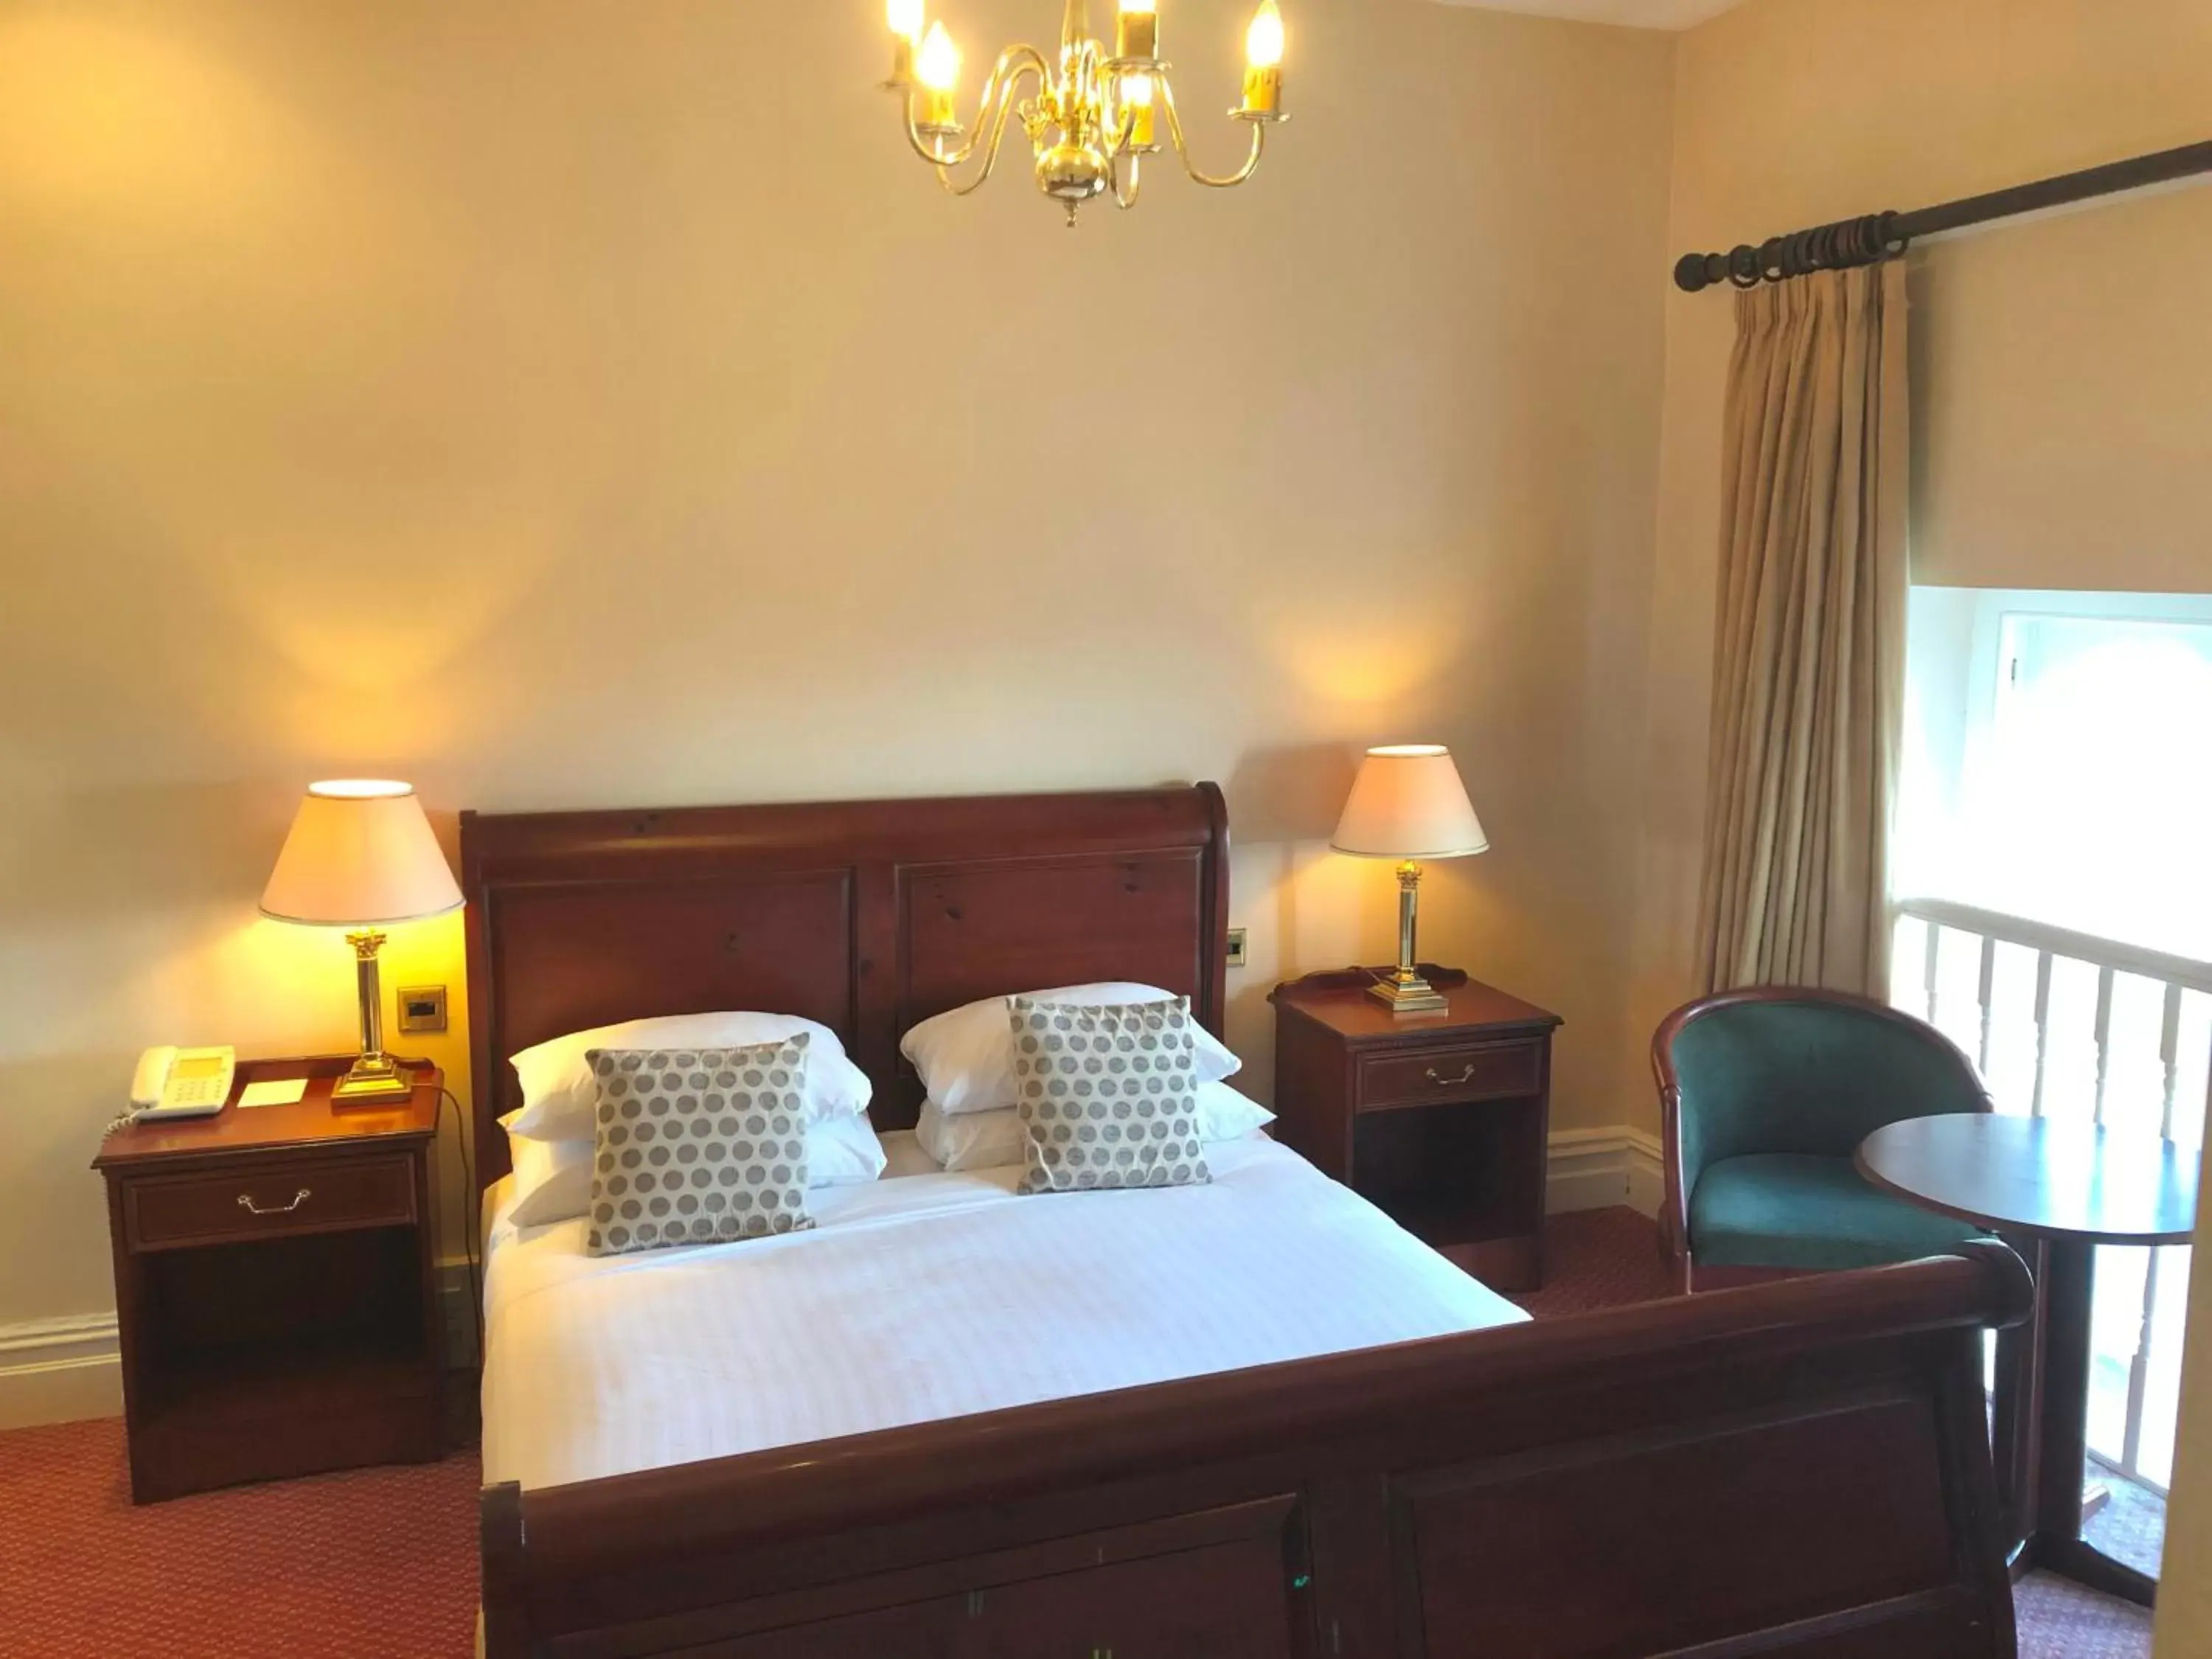 Family Room (2 Adults + 1 Child) in Cumbria Grand Hotel